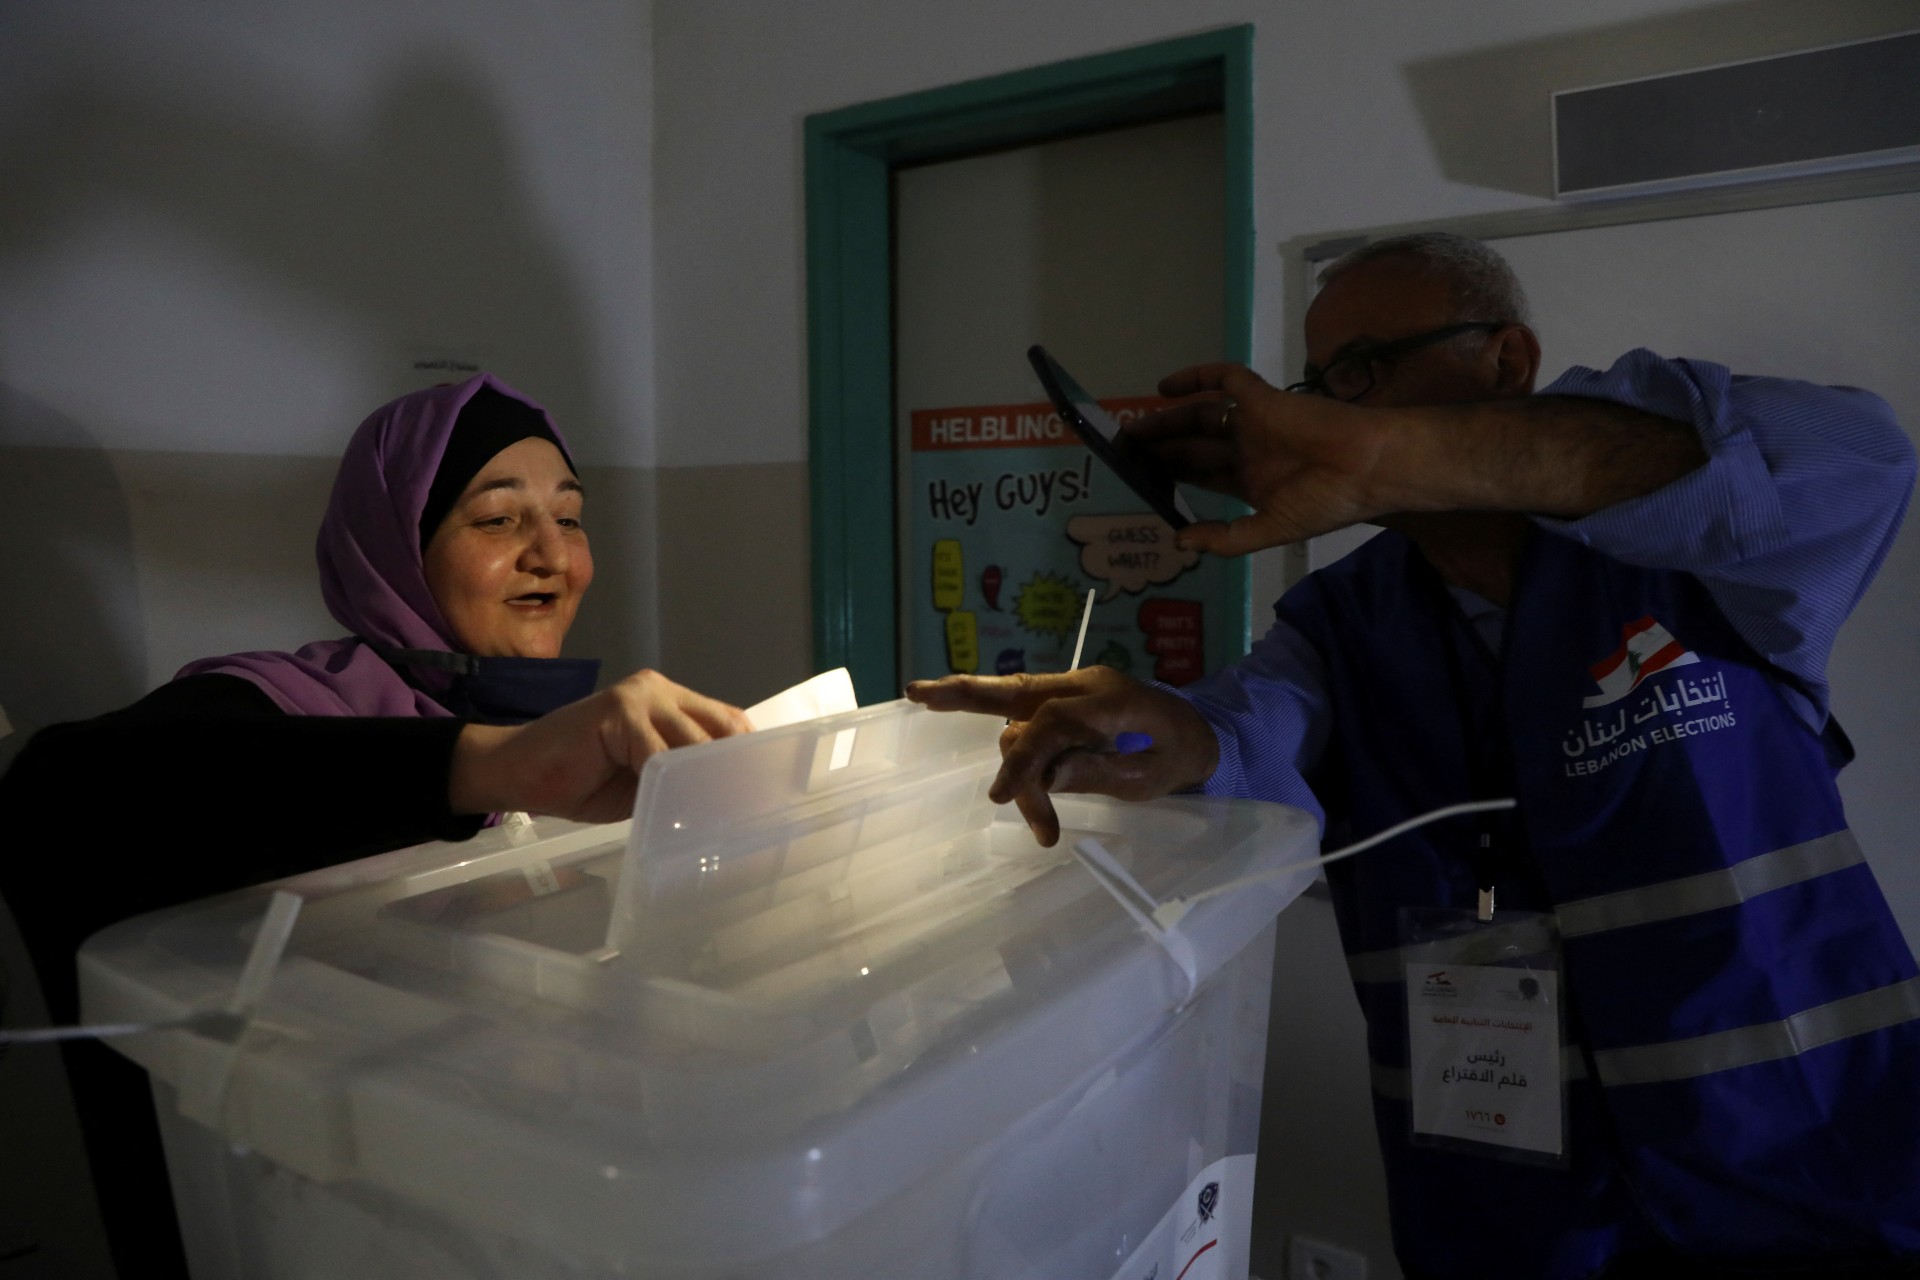 A woman casts her vote at a polling station during a power cut in Lebanon's parliamentary election, in Beirut (Reuters)